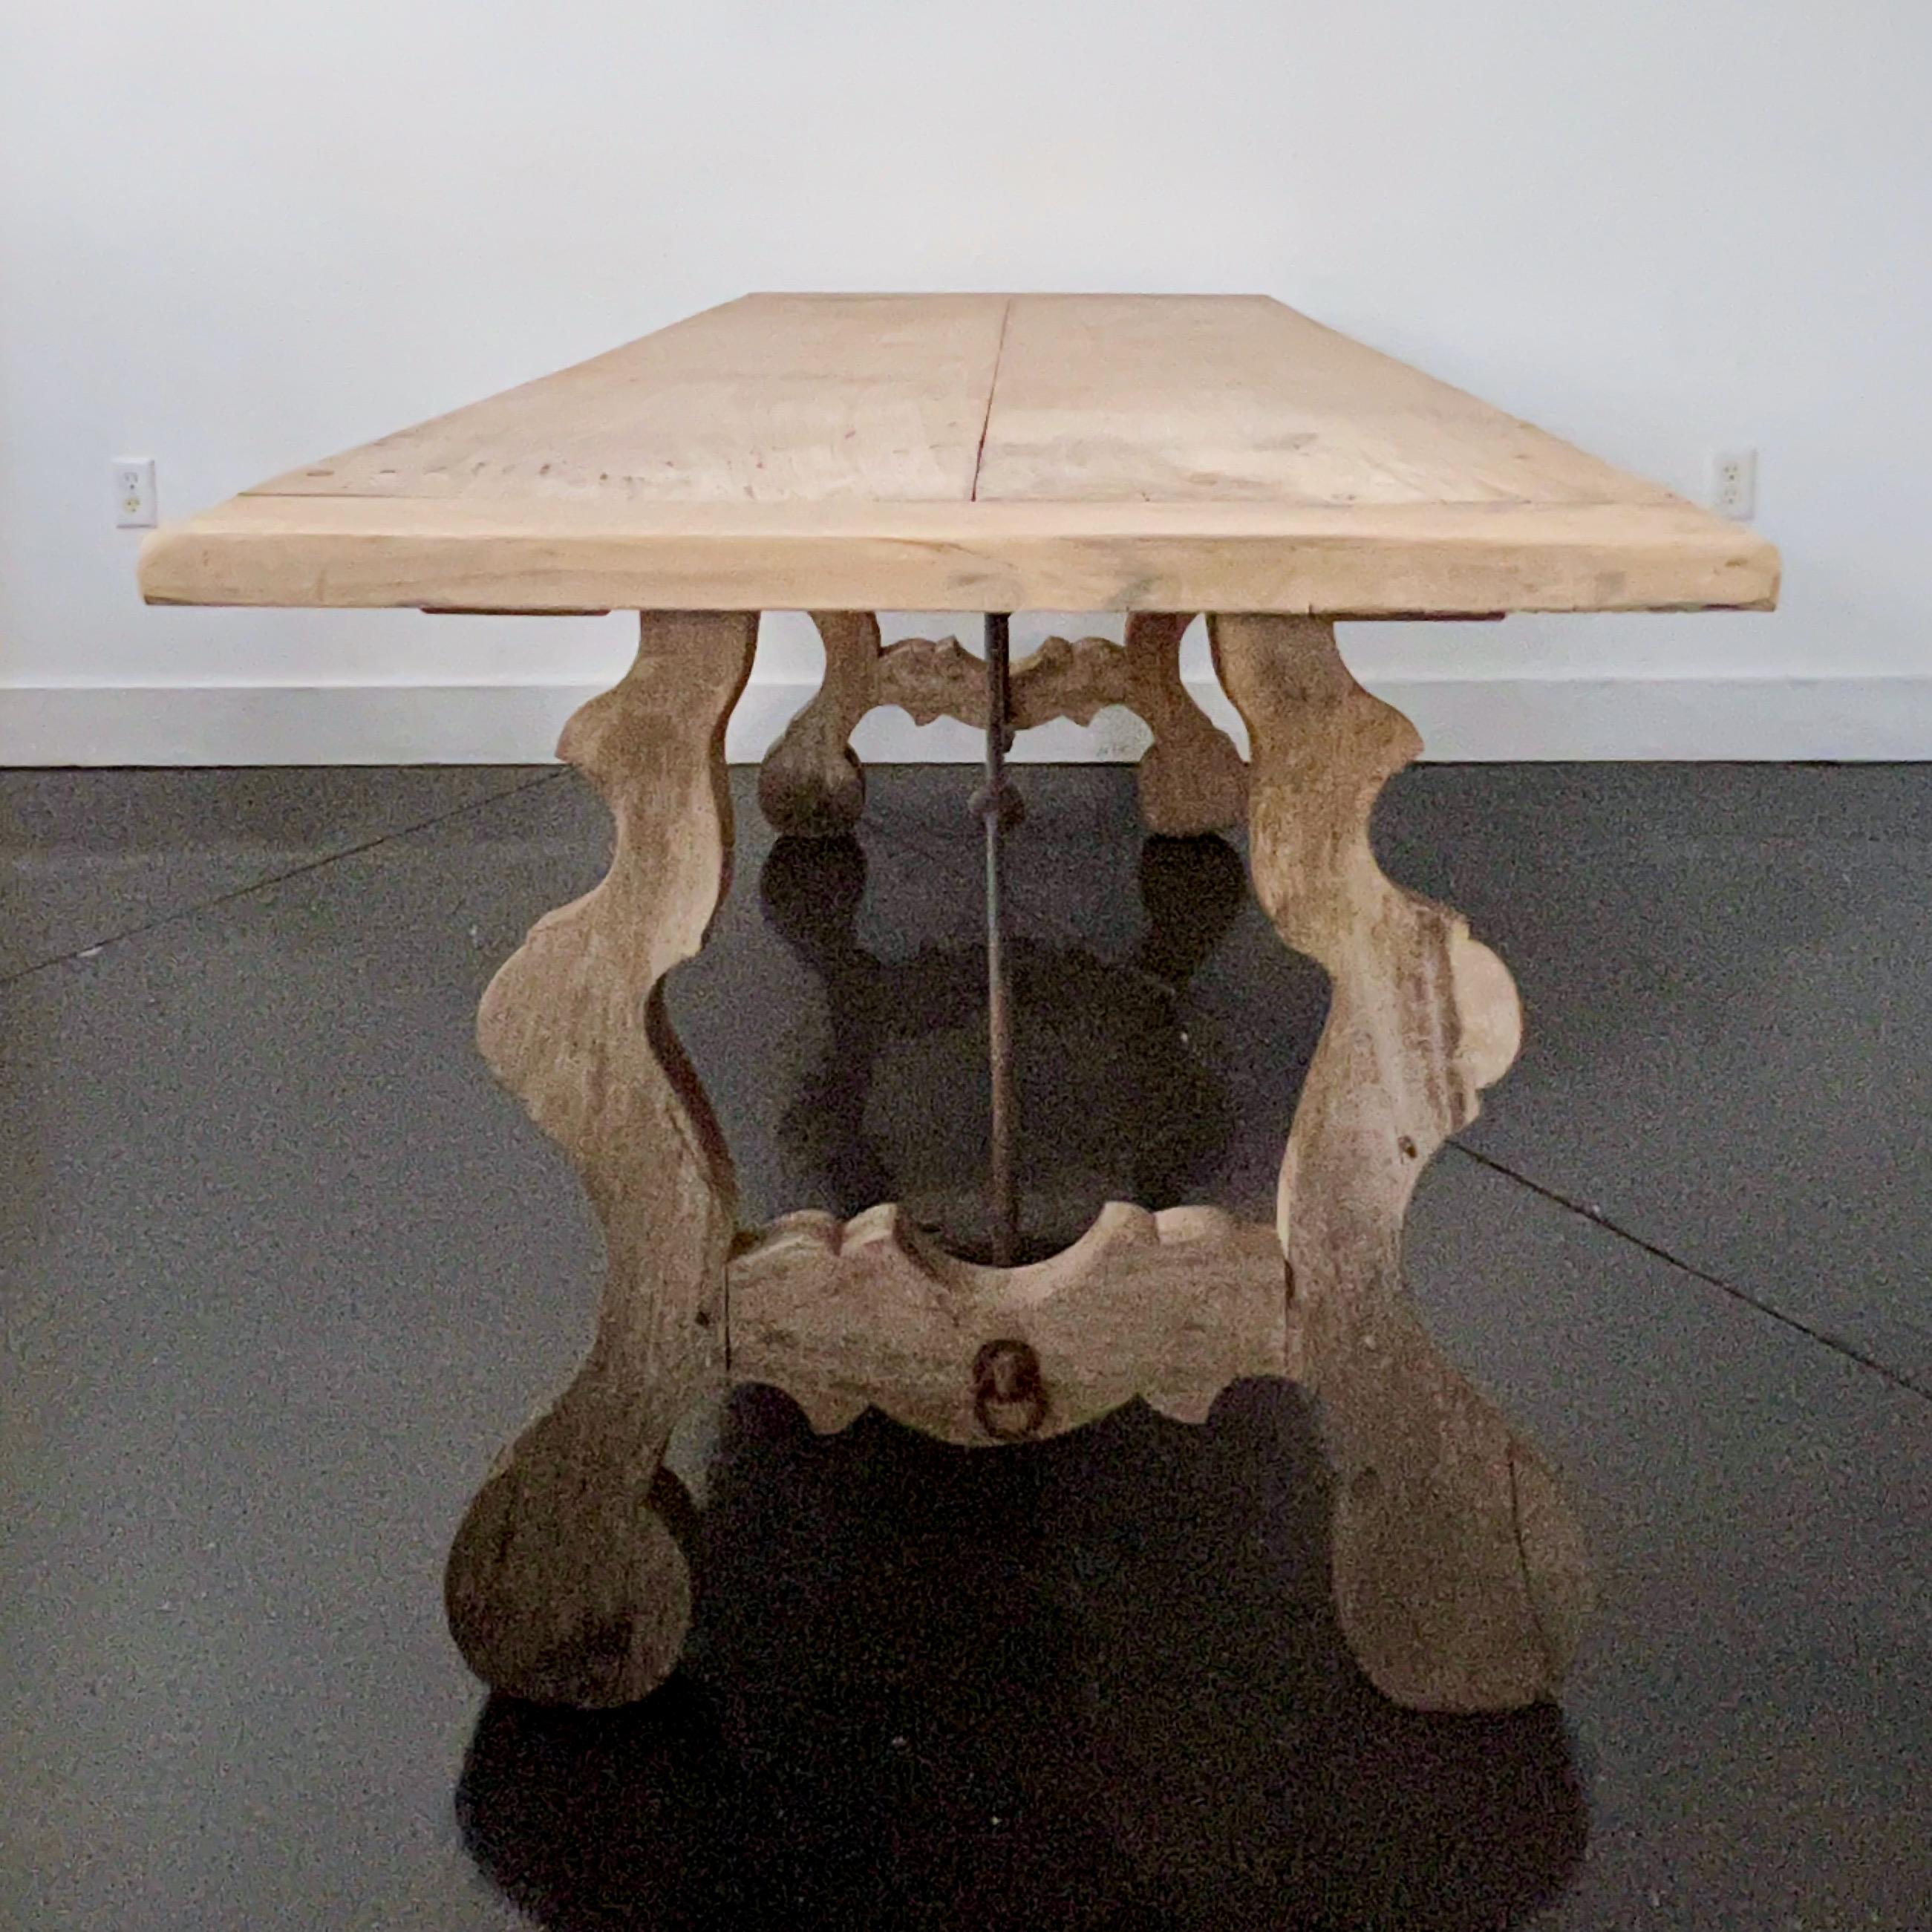 18th century Spanish dining table in superb patina featuring a trestle base with forged iron supports which is typical of Spanish tables. The legs have a Classic lyre form and support a patinated plank top.
Very sturdy handsome table can be use as